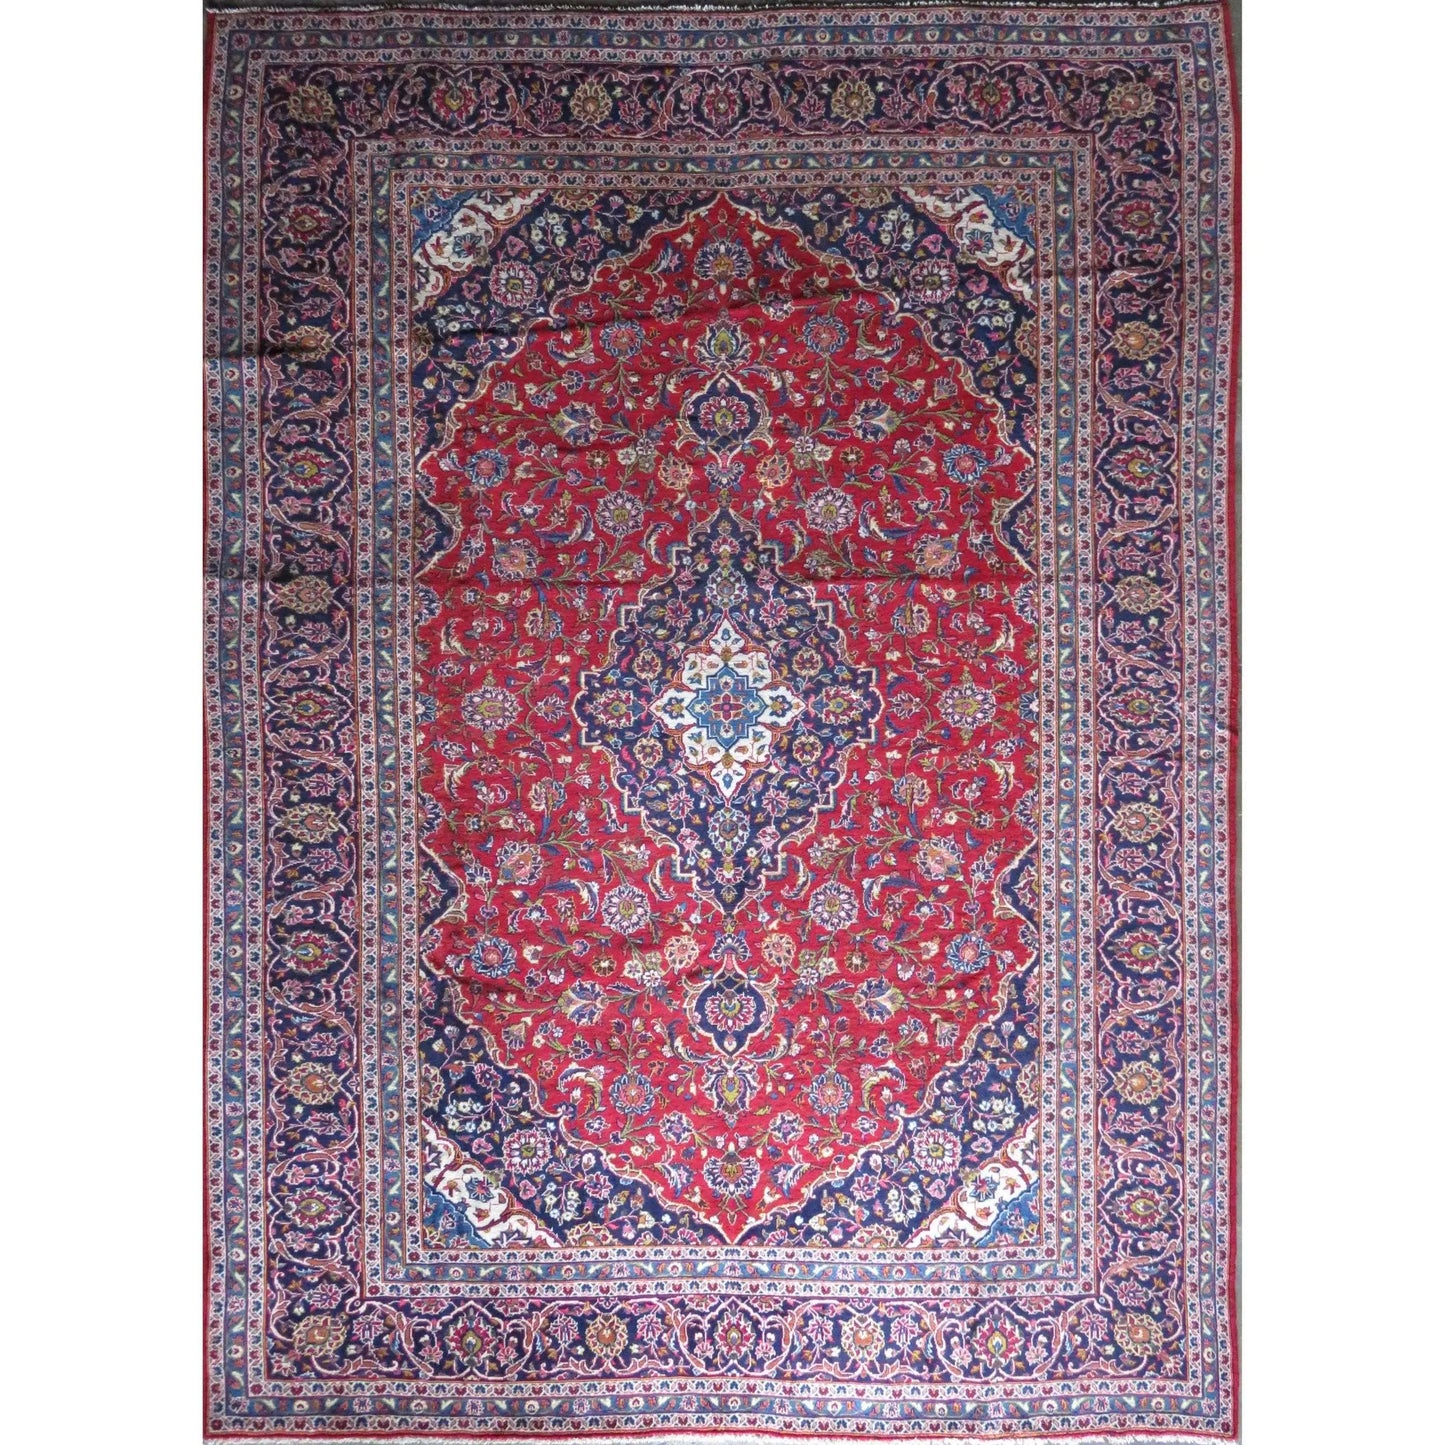 Hand-Knotted Persian Wool Rug _ Luxurious Vintage Design, 13'0" x 9'4", Artisan Crafted